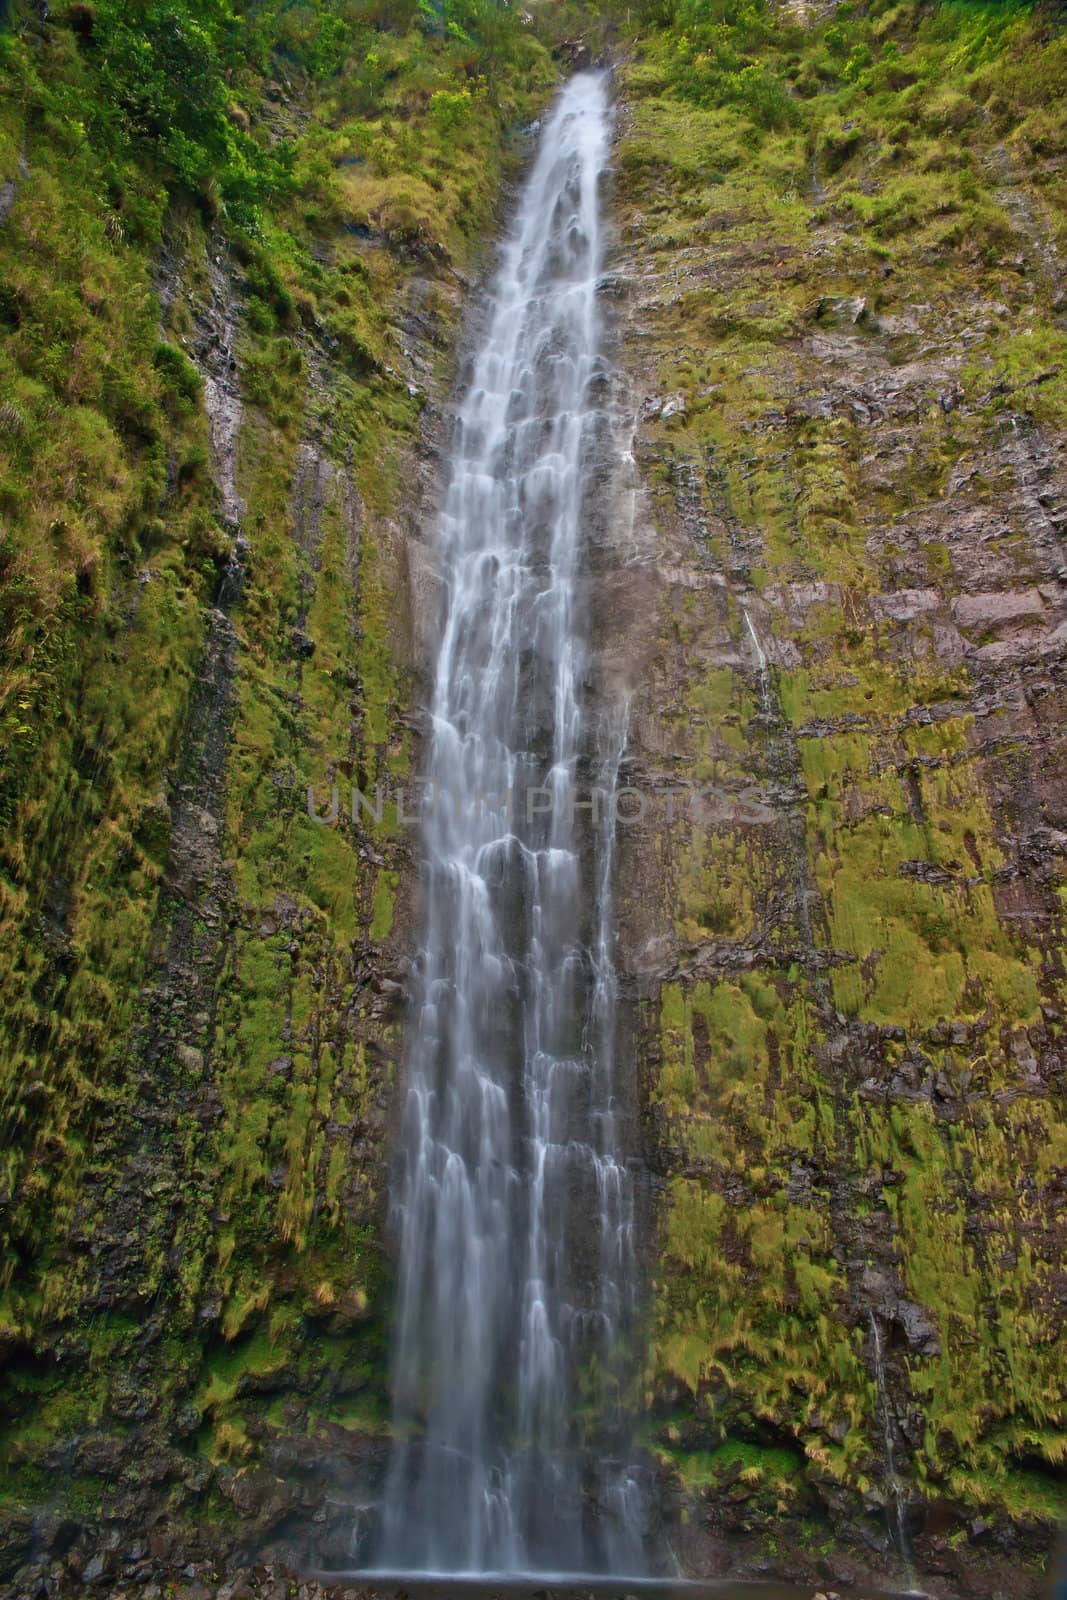 The Waimoku falls are at the end of the popular Waimoku Falls Trail on Maui Hawaii and about 120 meter tall.
